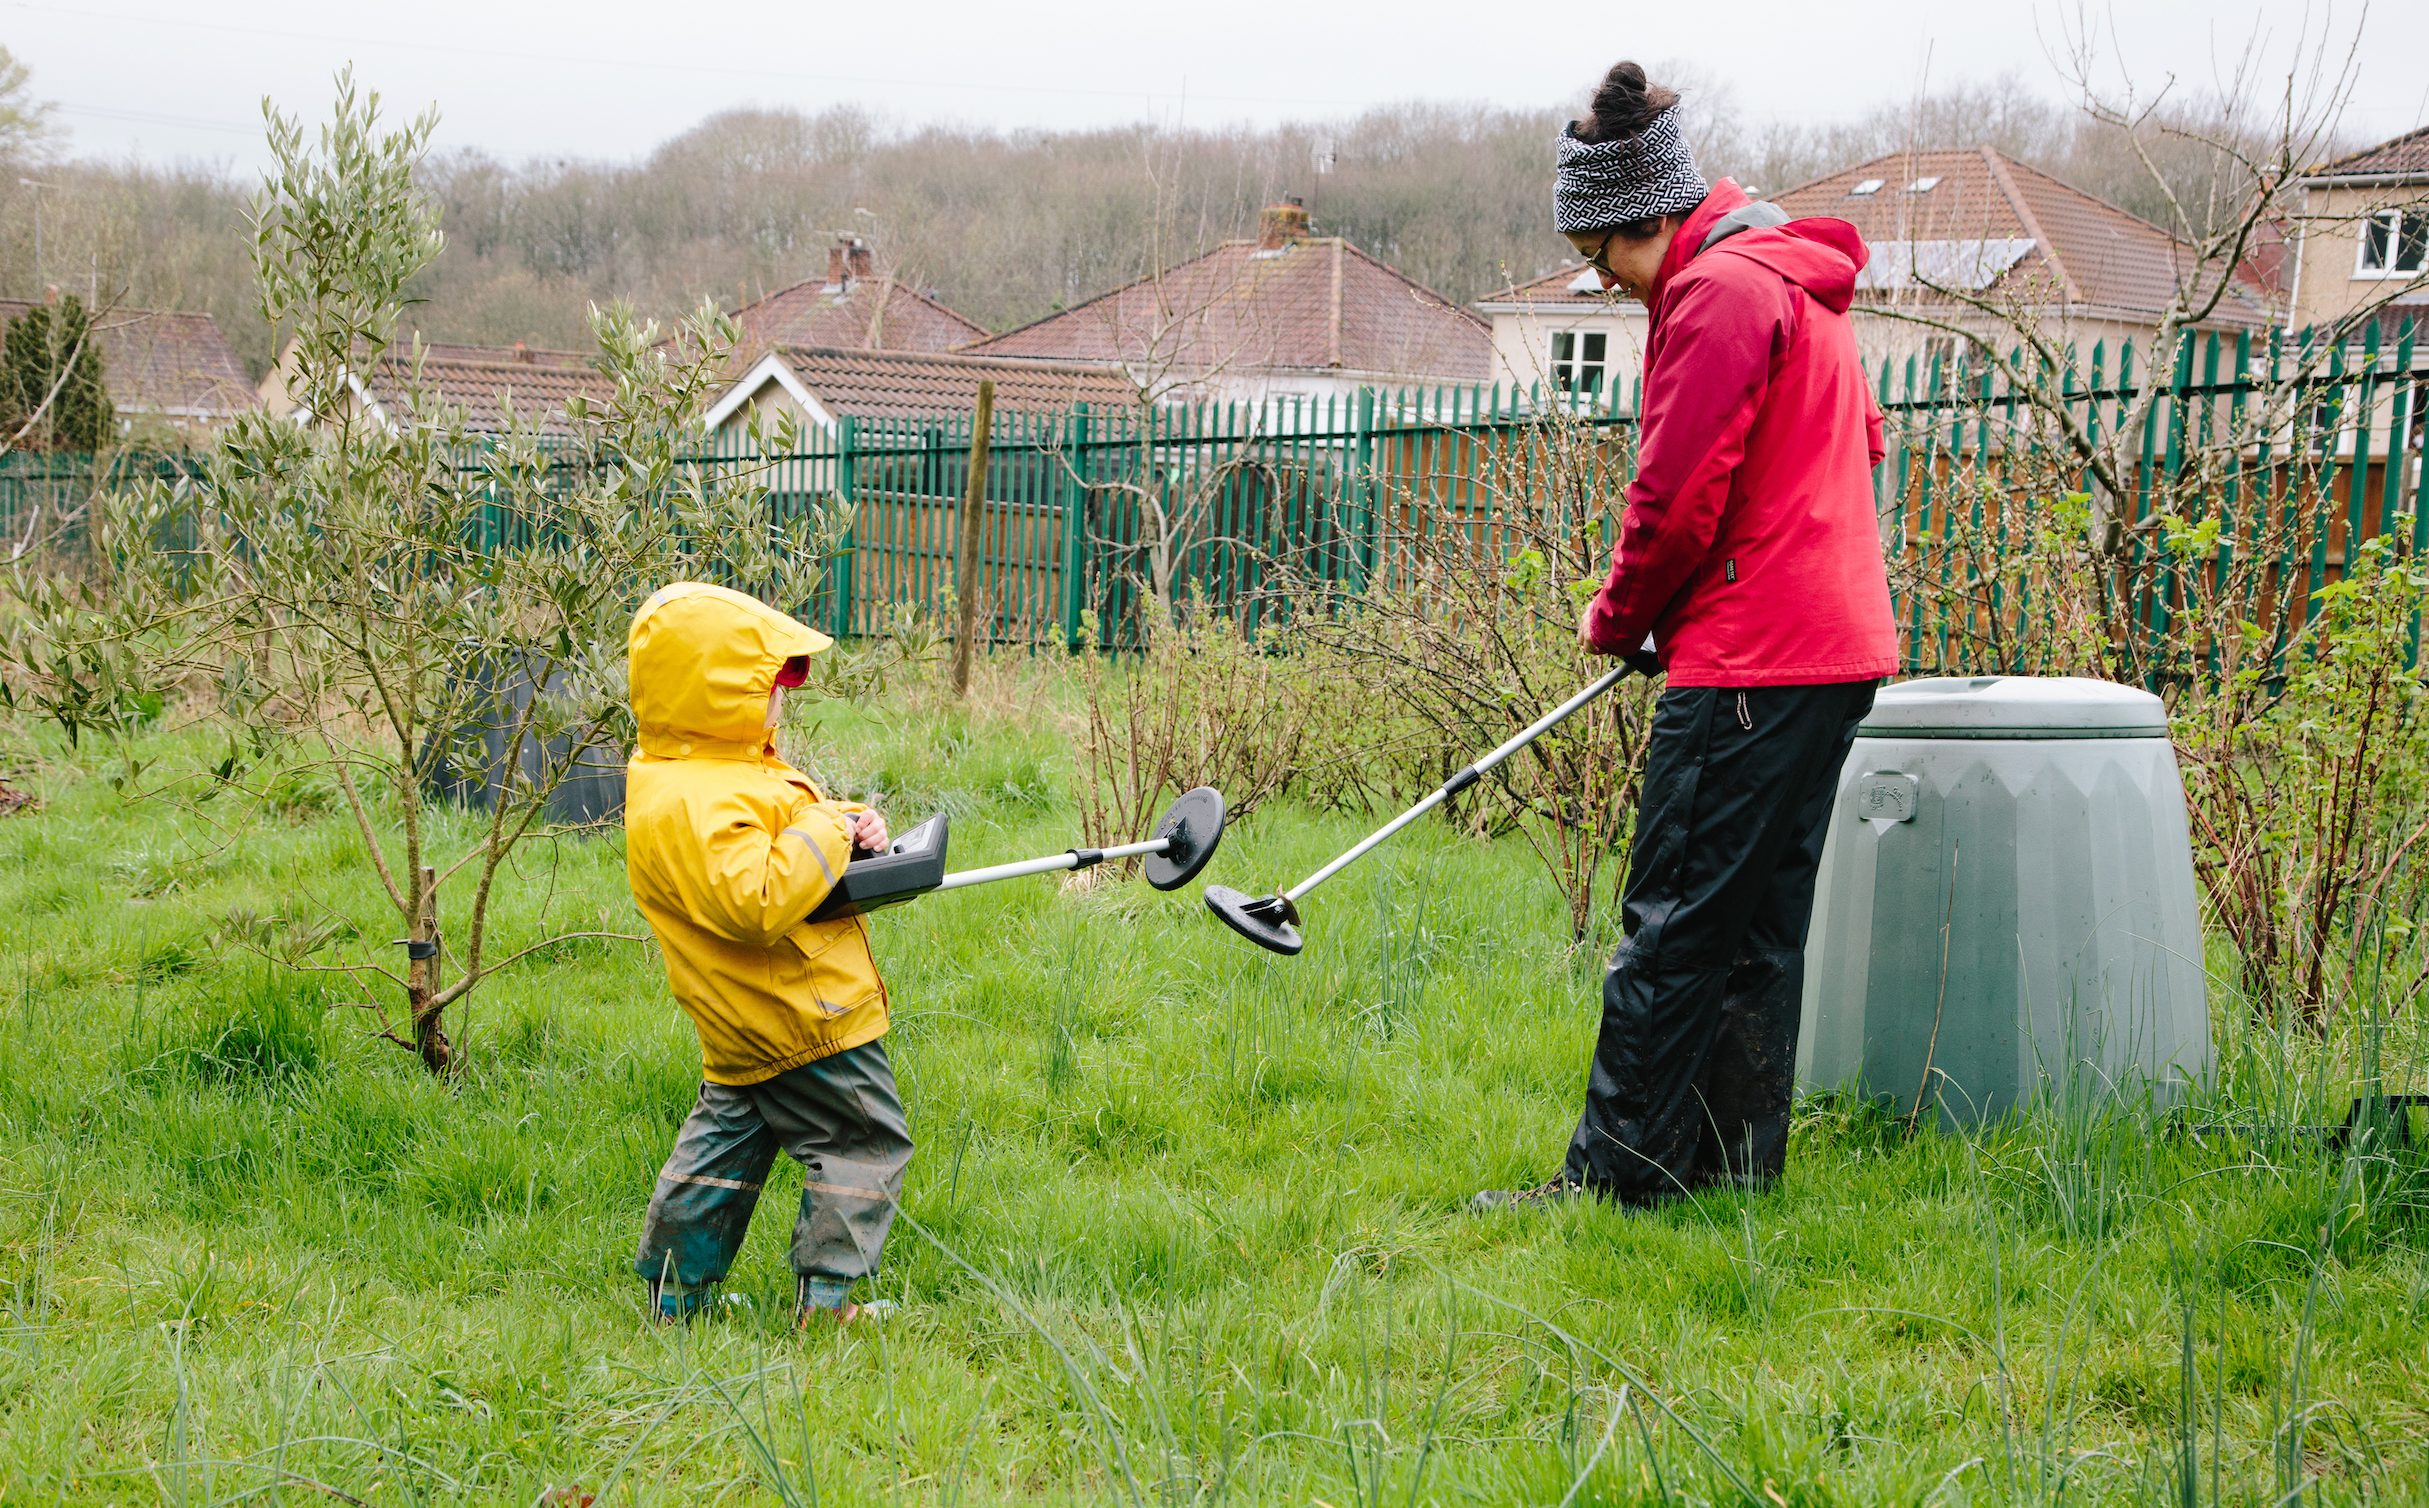 A child in a yellow raincoat and an adult in a red jacket using metal detectors on a grassy field with houses in the background.